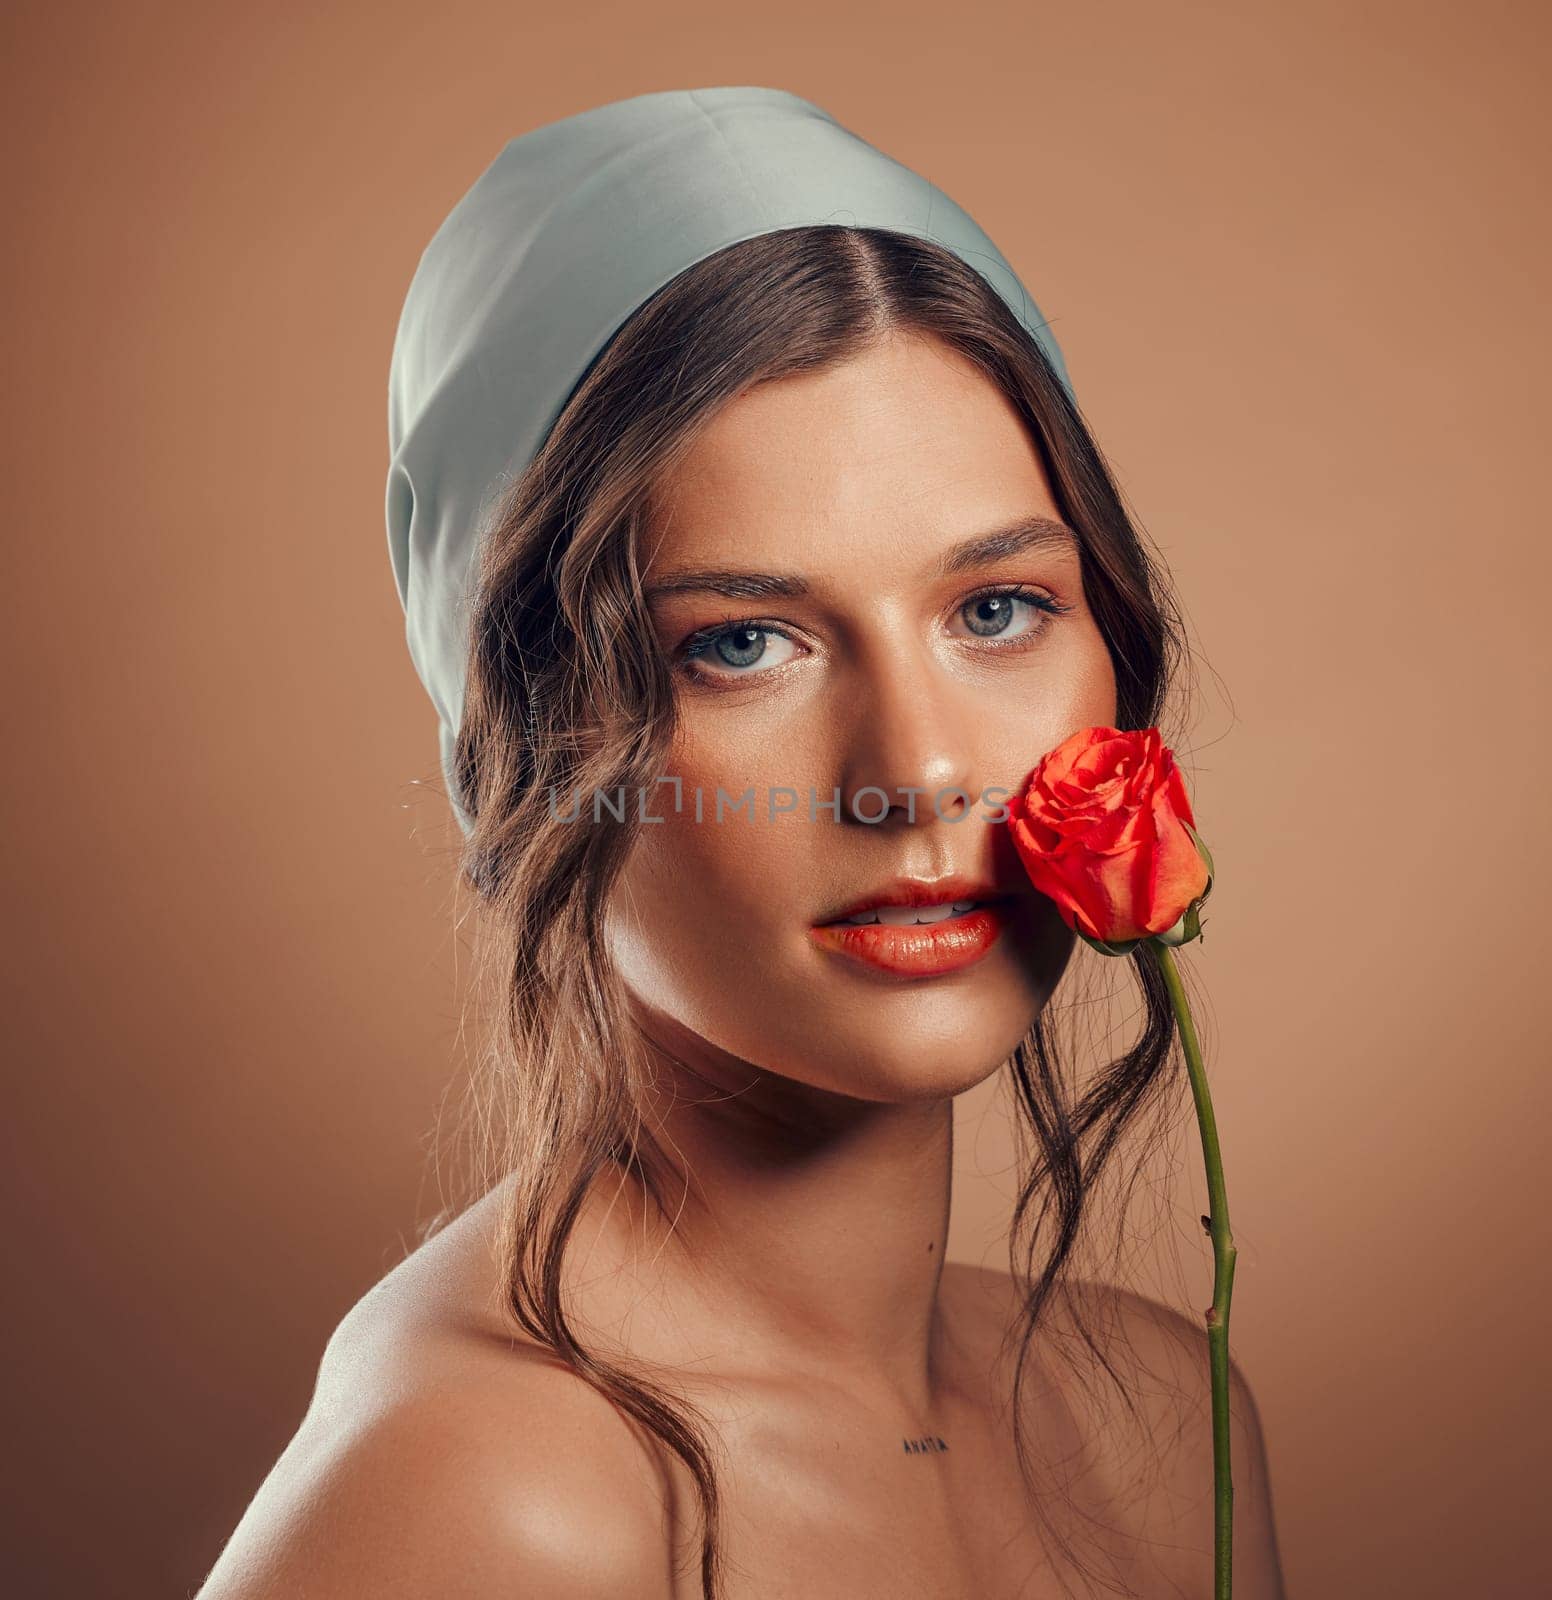 Rose, woman and face with natural beauty, skincare and luxury cosmetics of floral aesthetic, perfume or facial makeup on studio background. Headshot, portrait and model with roses, nature and flowers.